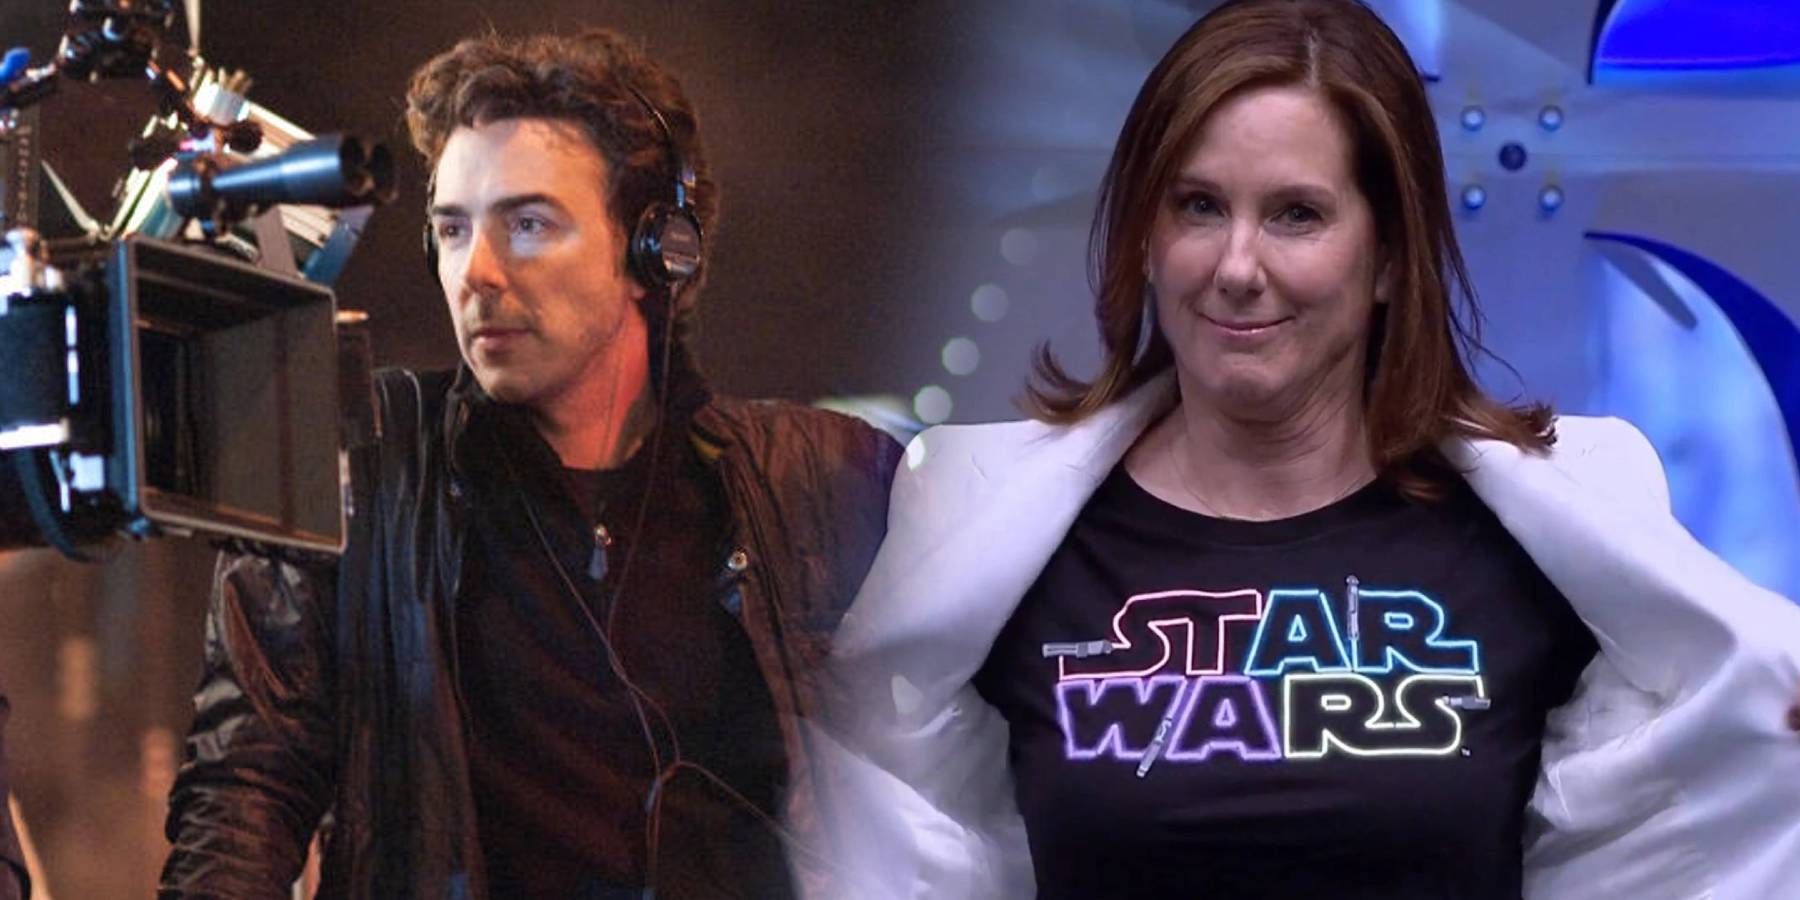 Director Shawn Levy and Lucasfilm president Kathleen Kennedy